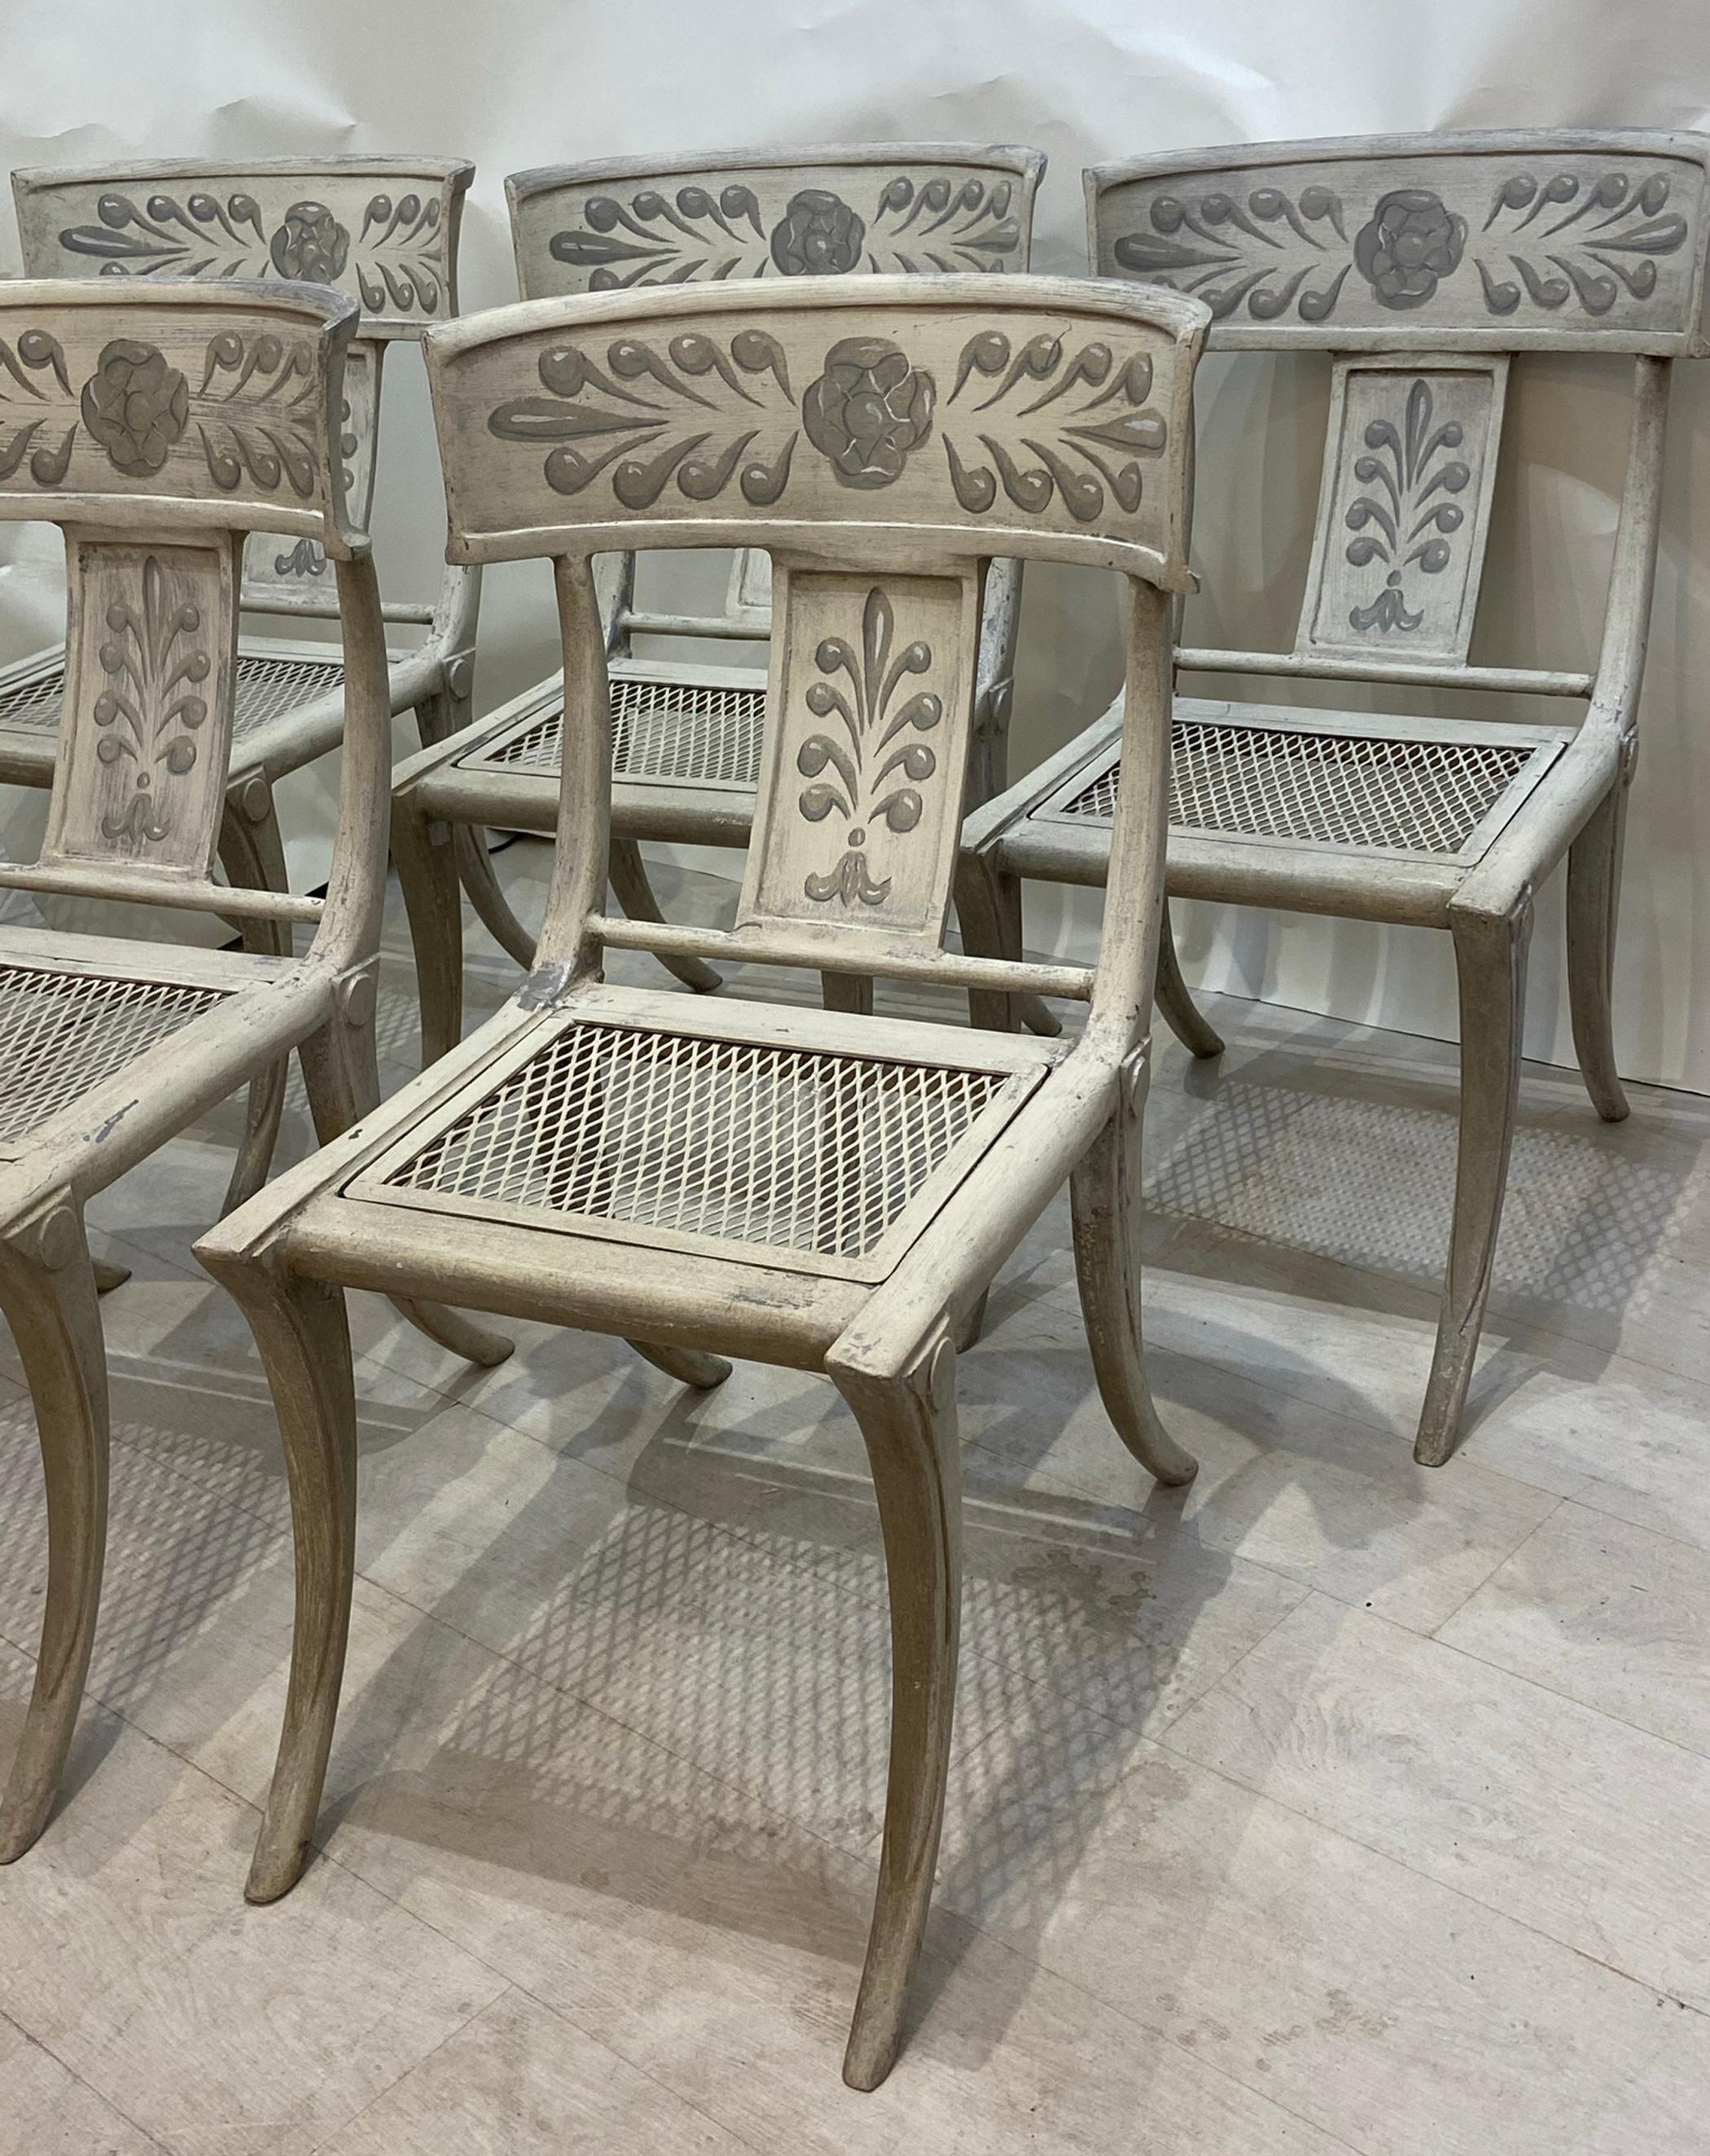 Set of 6 rare and important Swedish Neoclassical painted metal kilsmos chairs. ( see Doyle auction David Eastman Collection sale otdeo1 lot 534) Some paint loss and some professional restorations. In very good Condition very sturdy. These are well